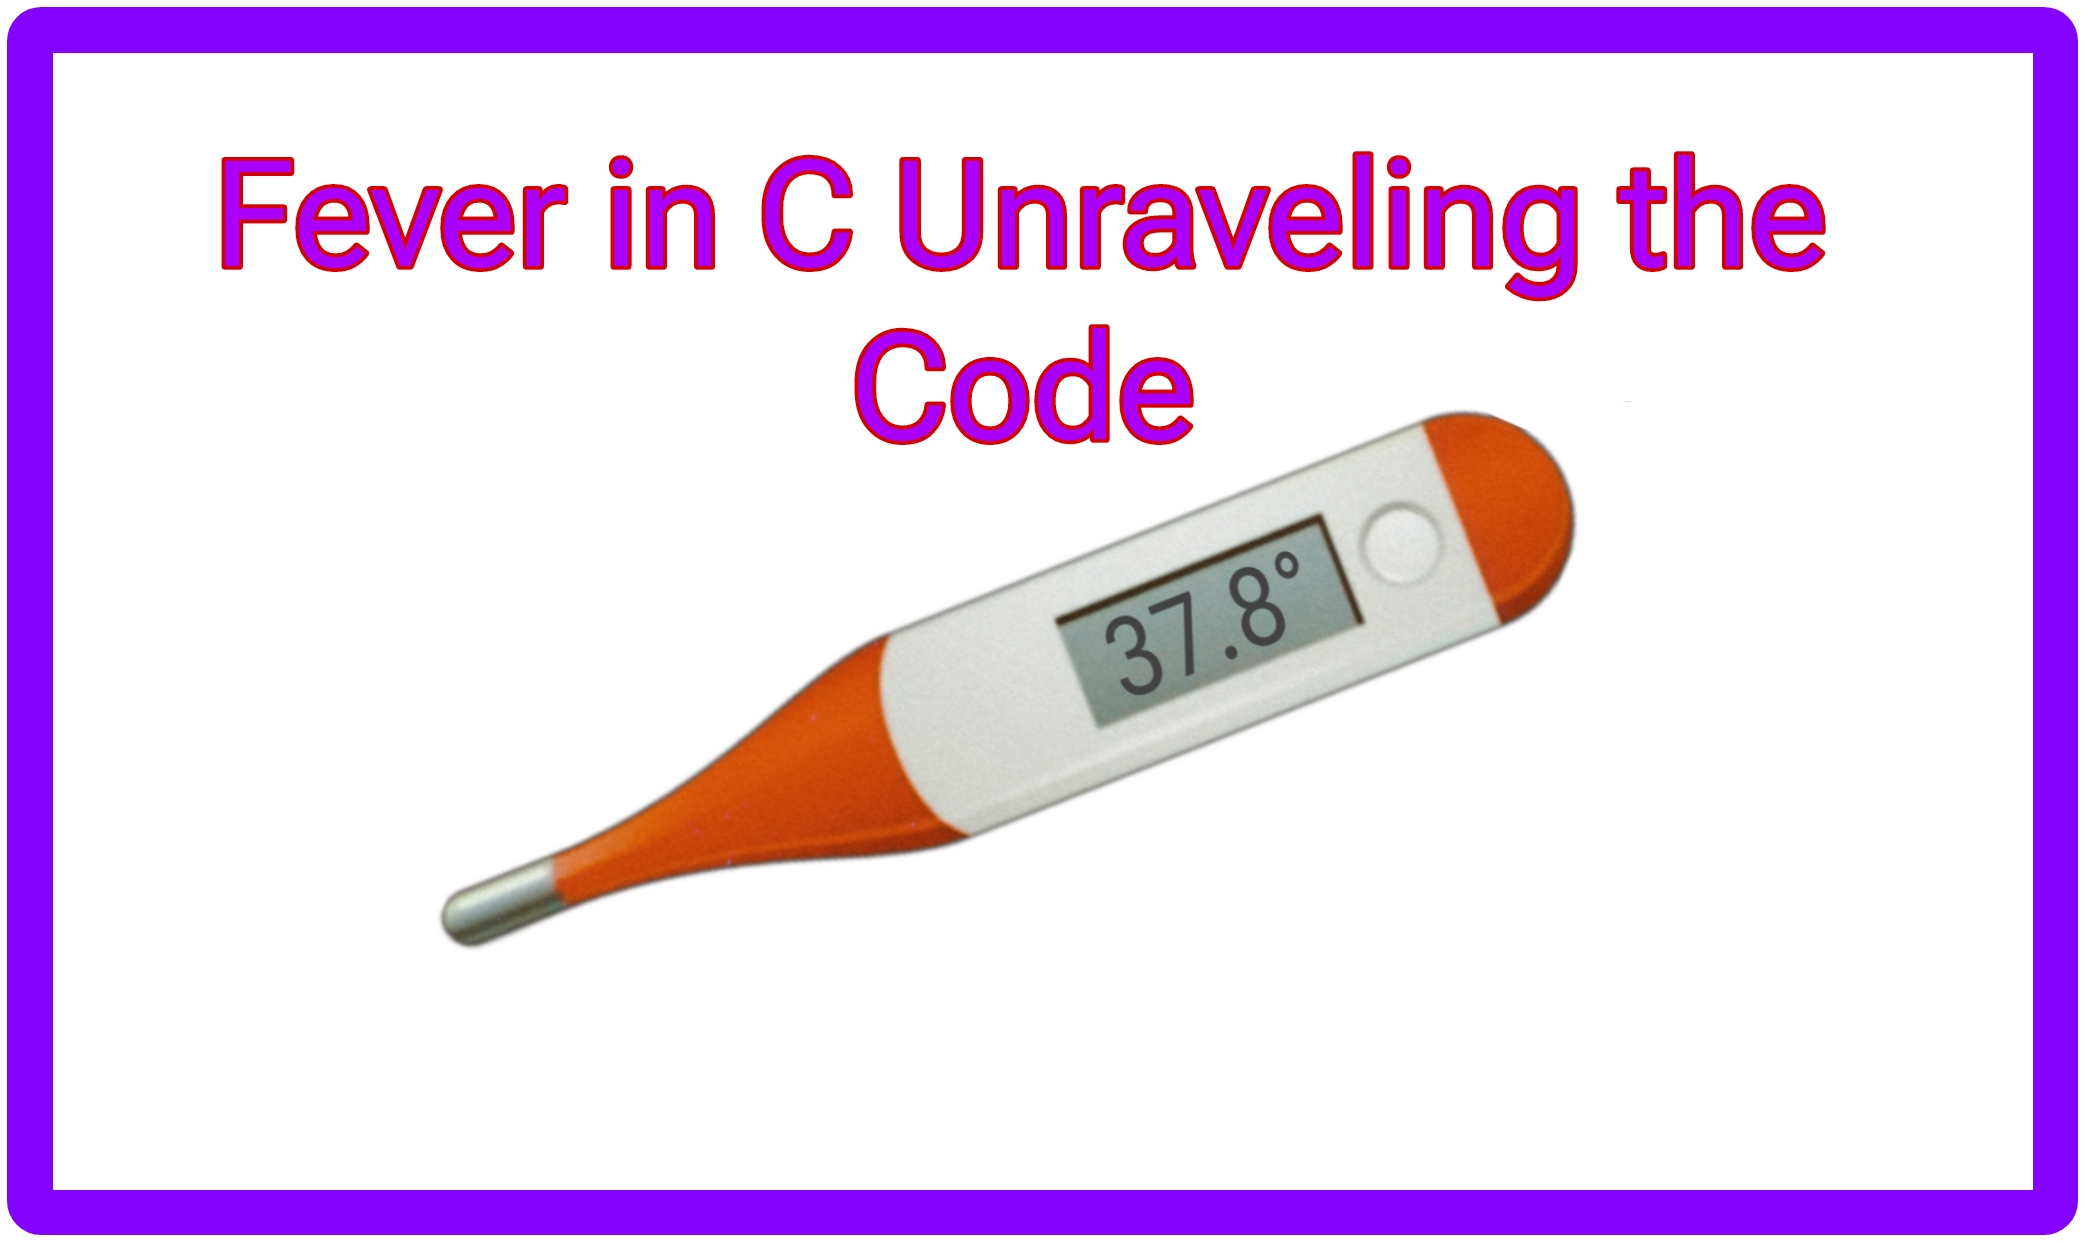 Fever in C Unraveling the Code